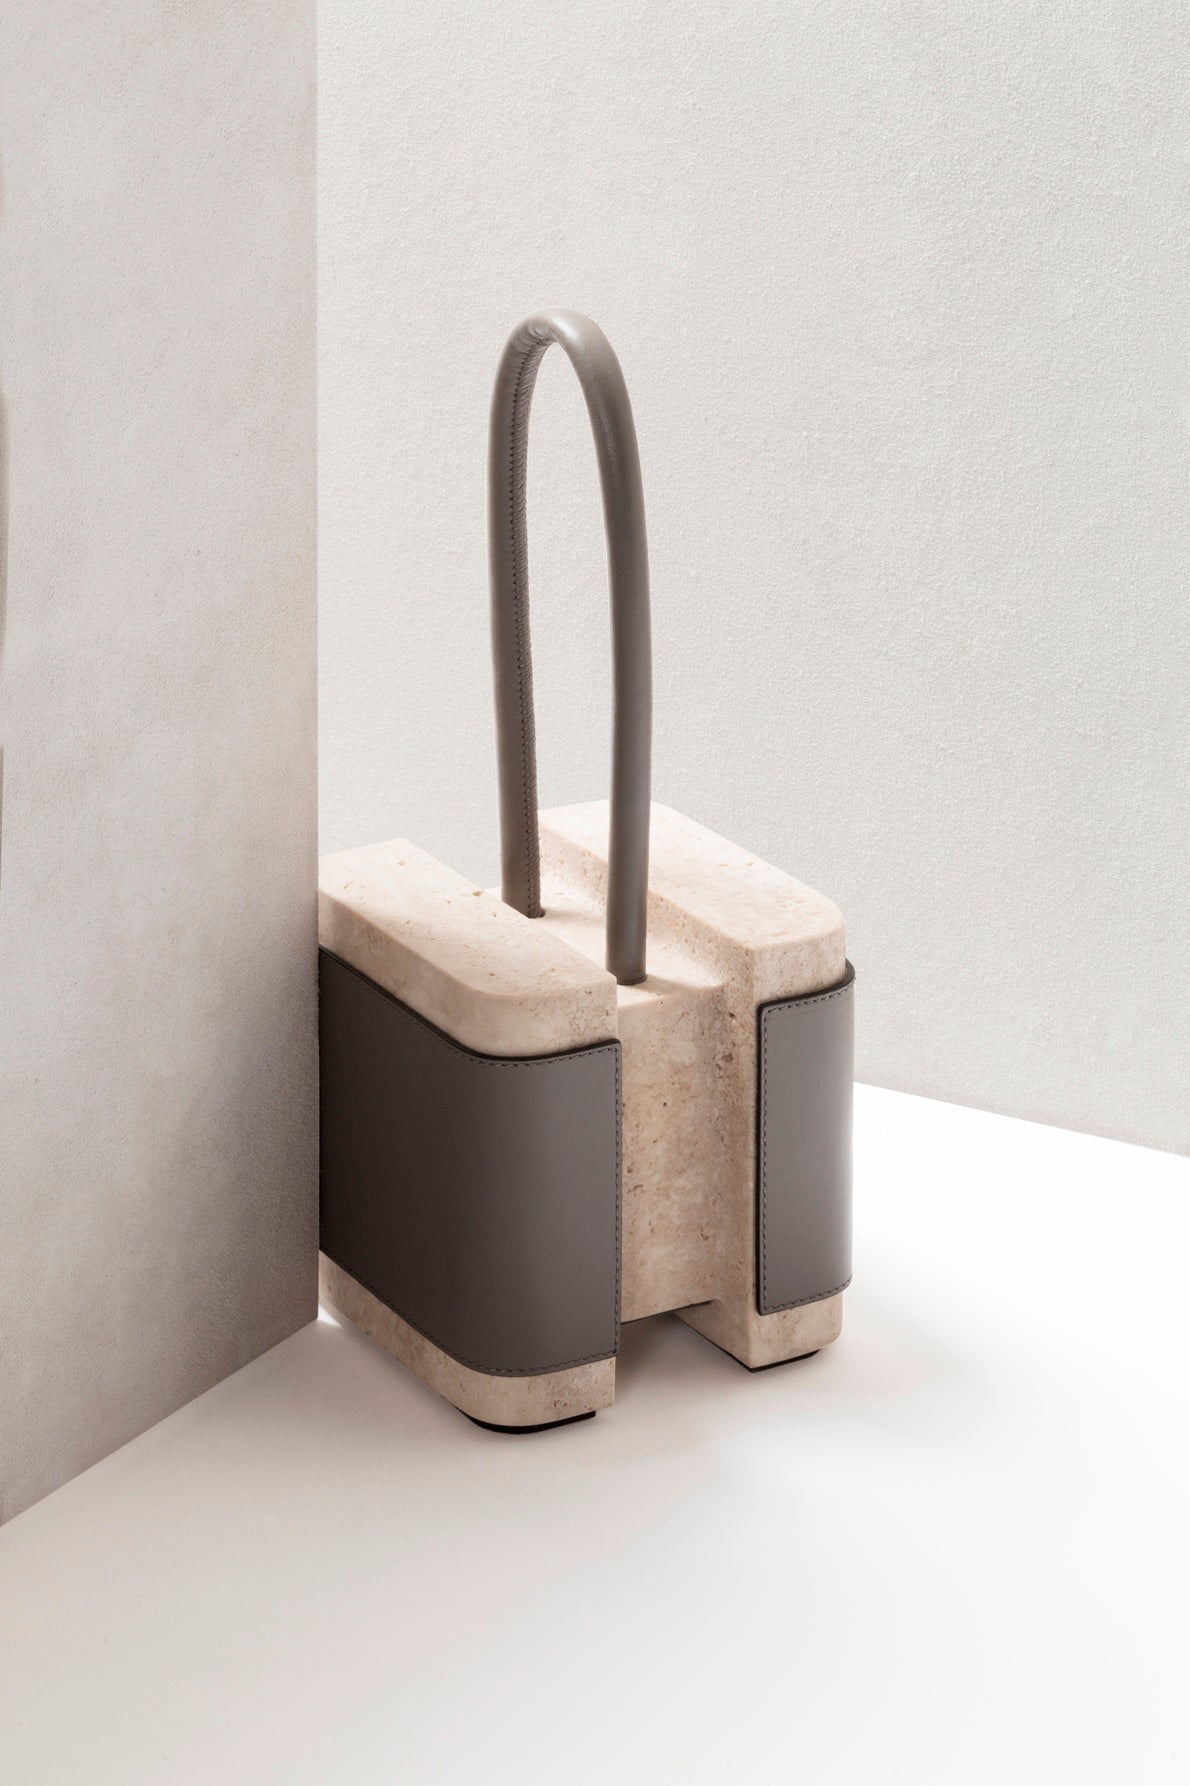 Giobagnara x Glenn Sestig Lloyd Leather & Marble Doorstop | Collaboration with Glenn Sestig | Stylish Design with Leather and Travertine | Leather Handle Available in Nappa Only | Explore a Range of Luxury Home Accessories at 2Jour Concierge, #1 luxury high-end gift & lifestyle shop